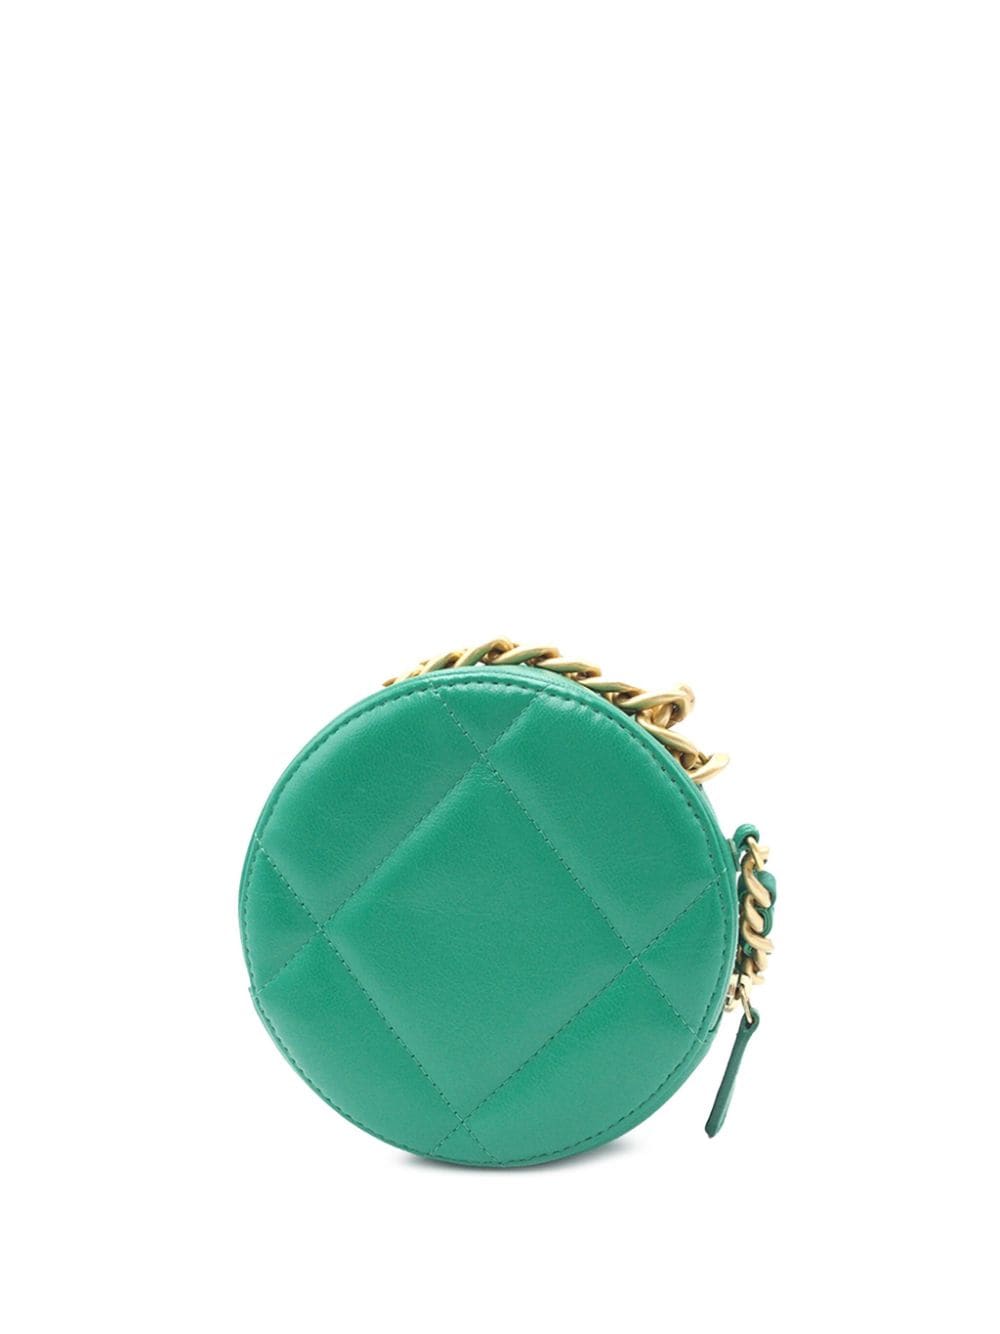 Pre-owned Chanel 19 斜挎包（2020年典藏款） In Green